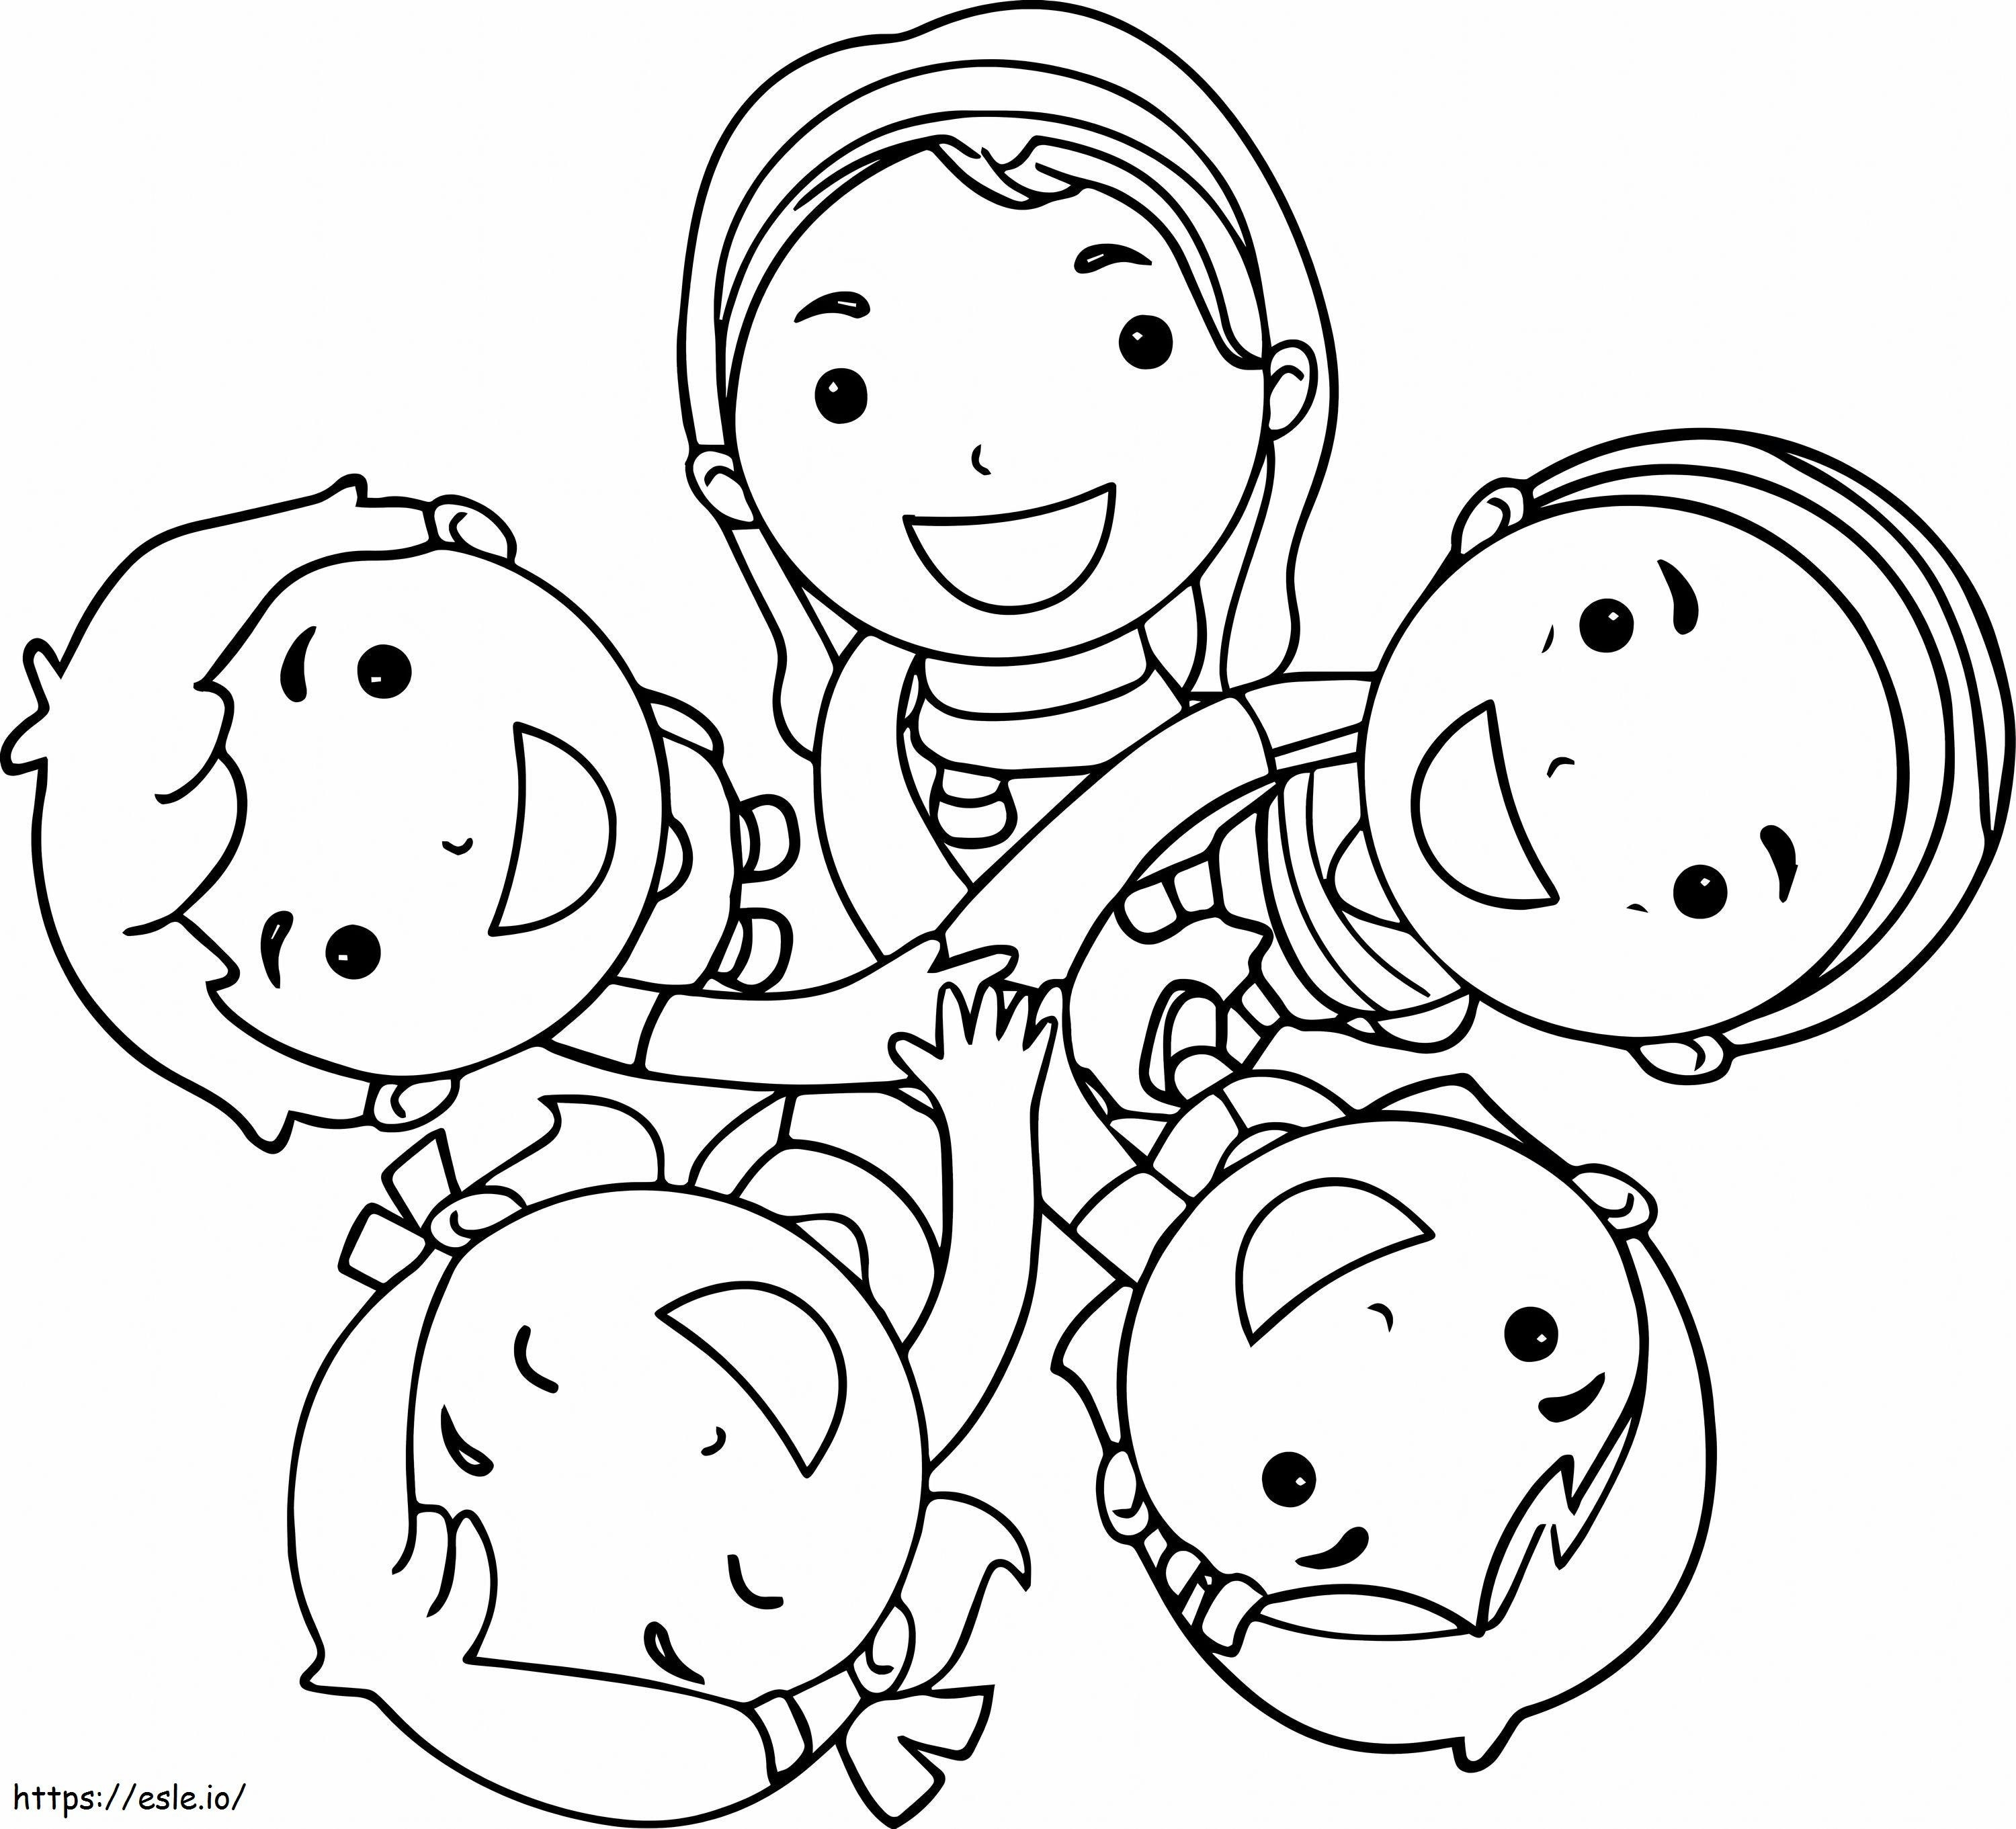 Five Friendship coloring page